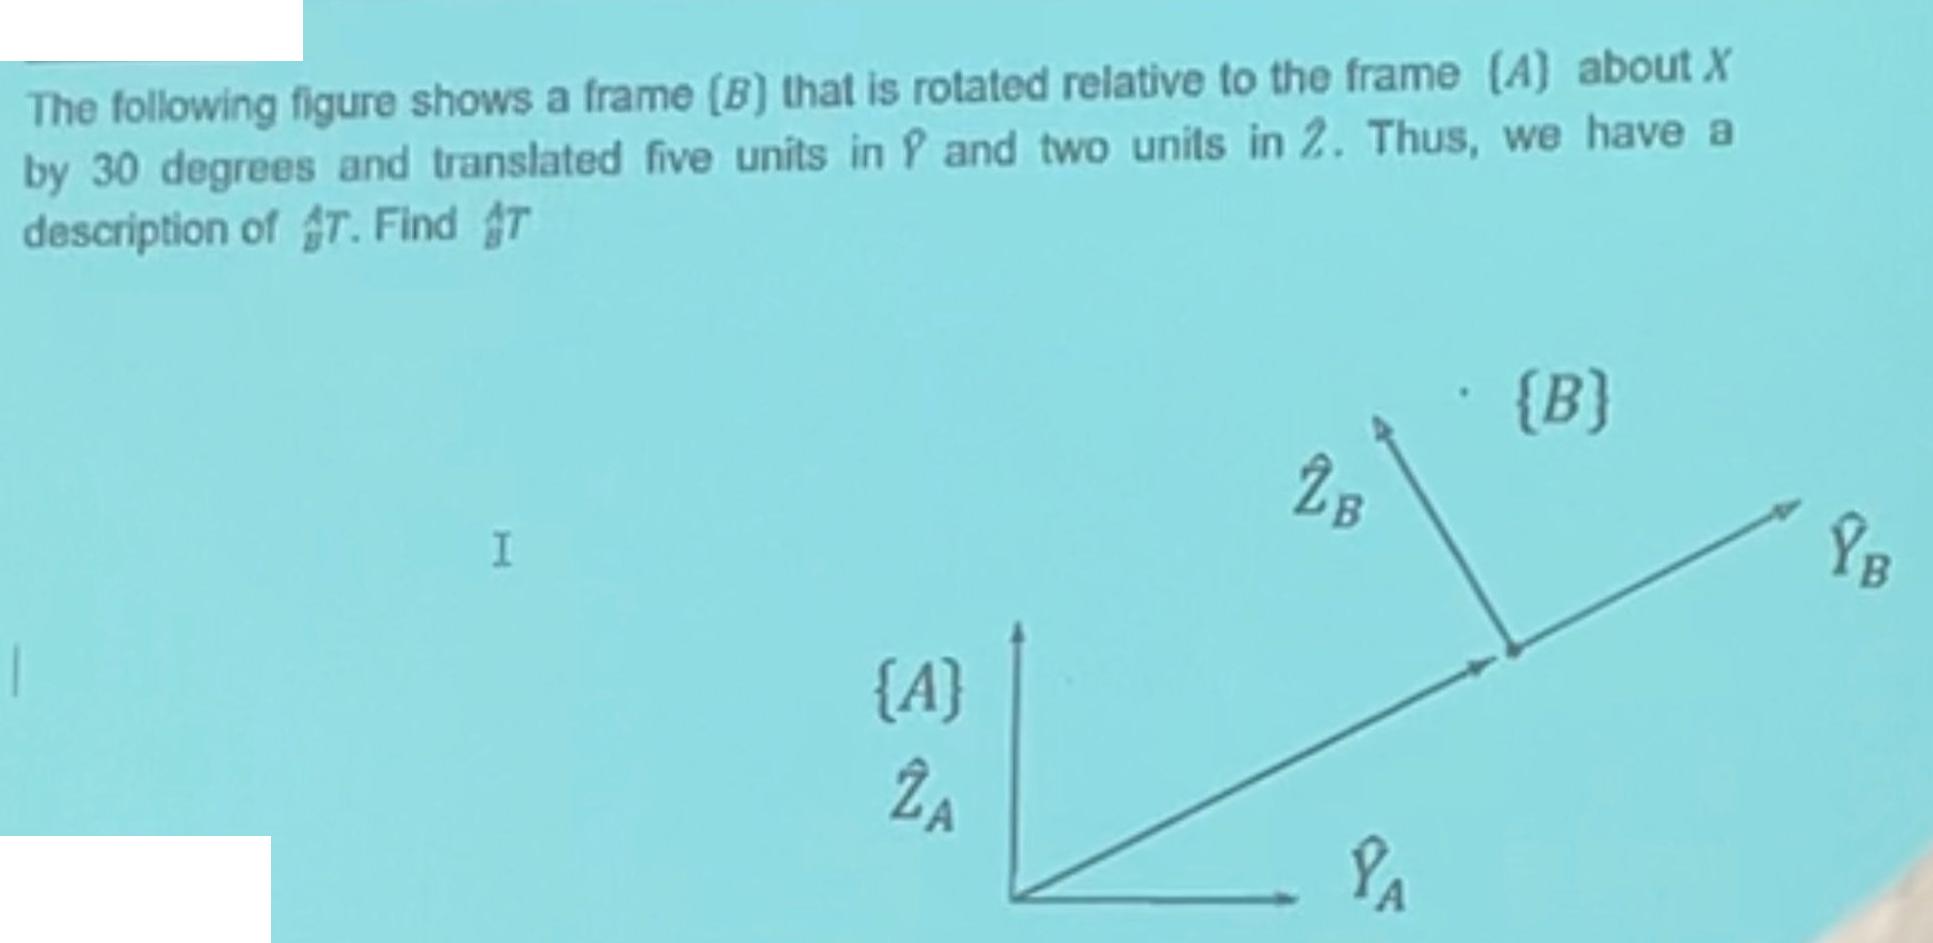 The following figure shows a frame (B) that is rotated relative to the frame (A) about X by 30 degrees and